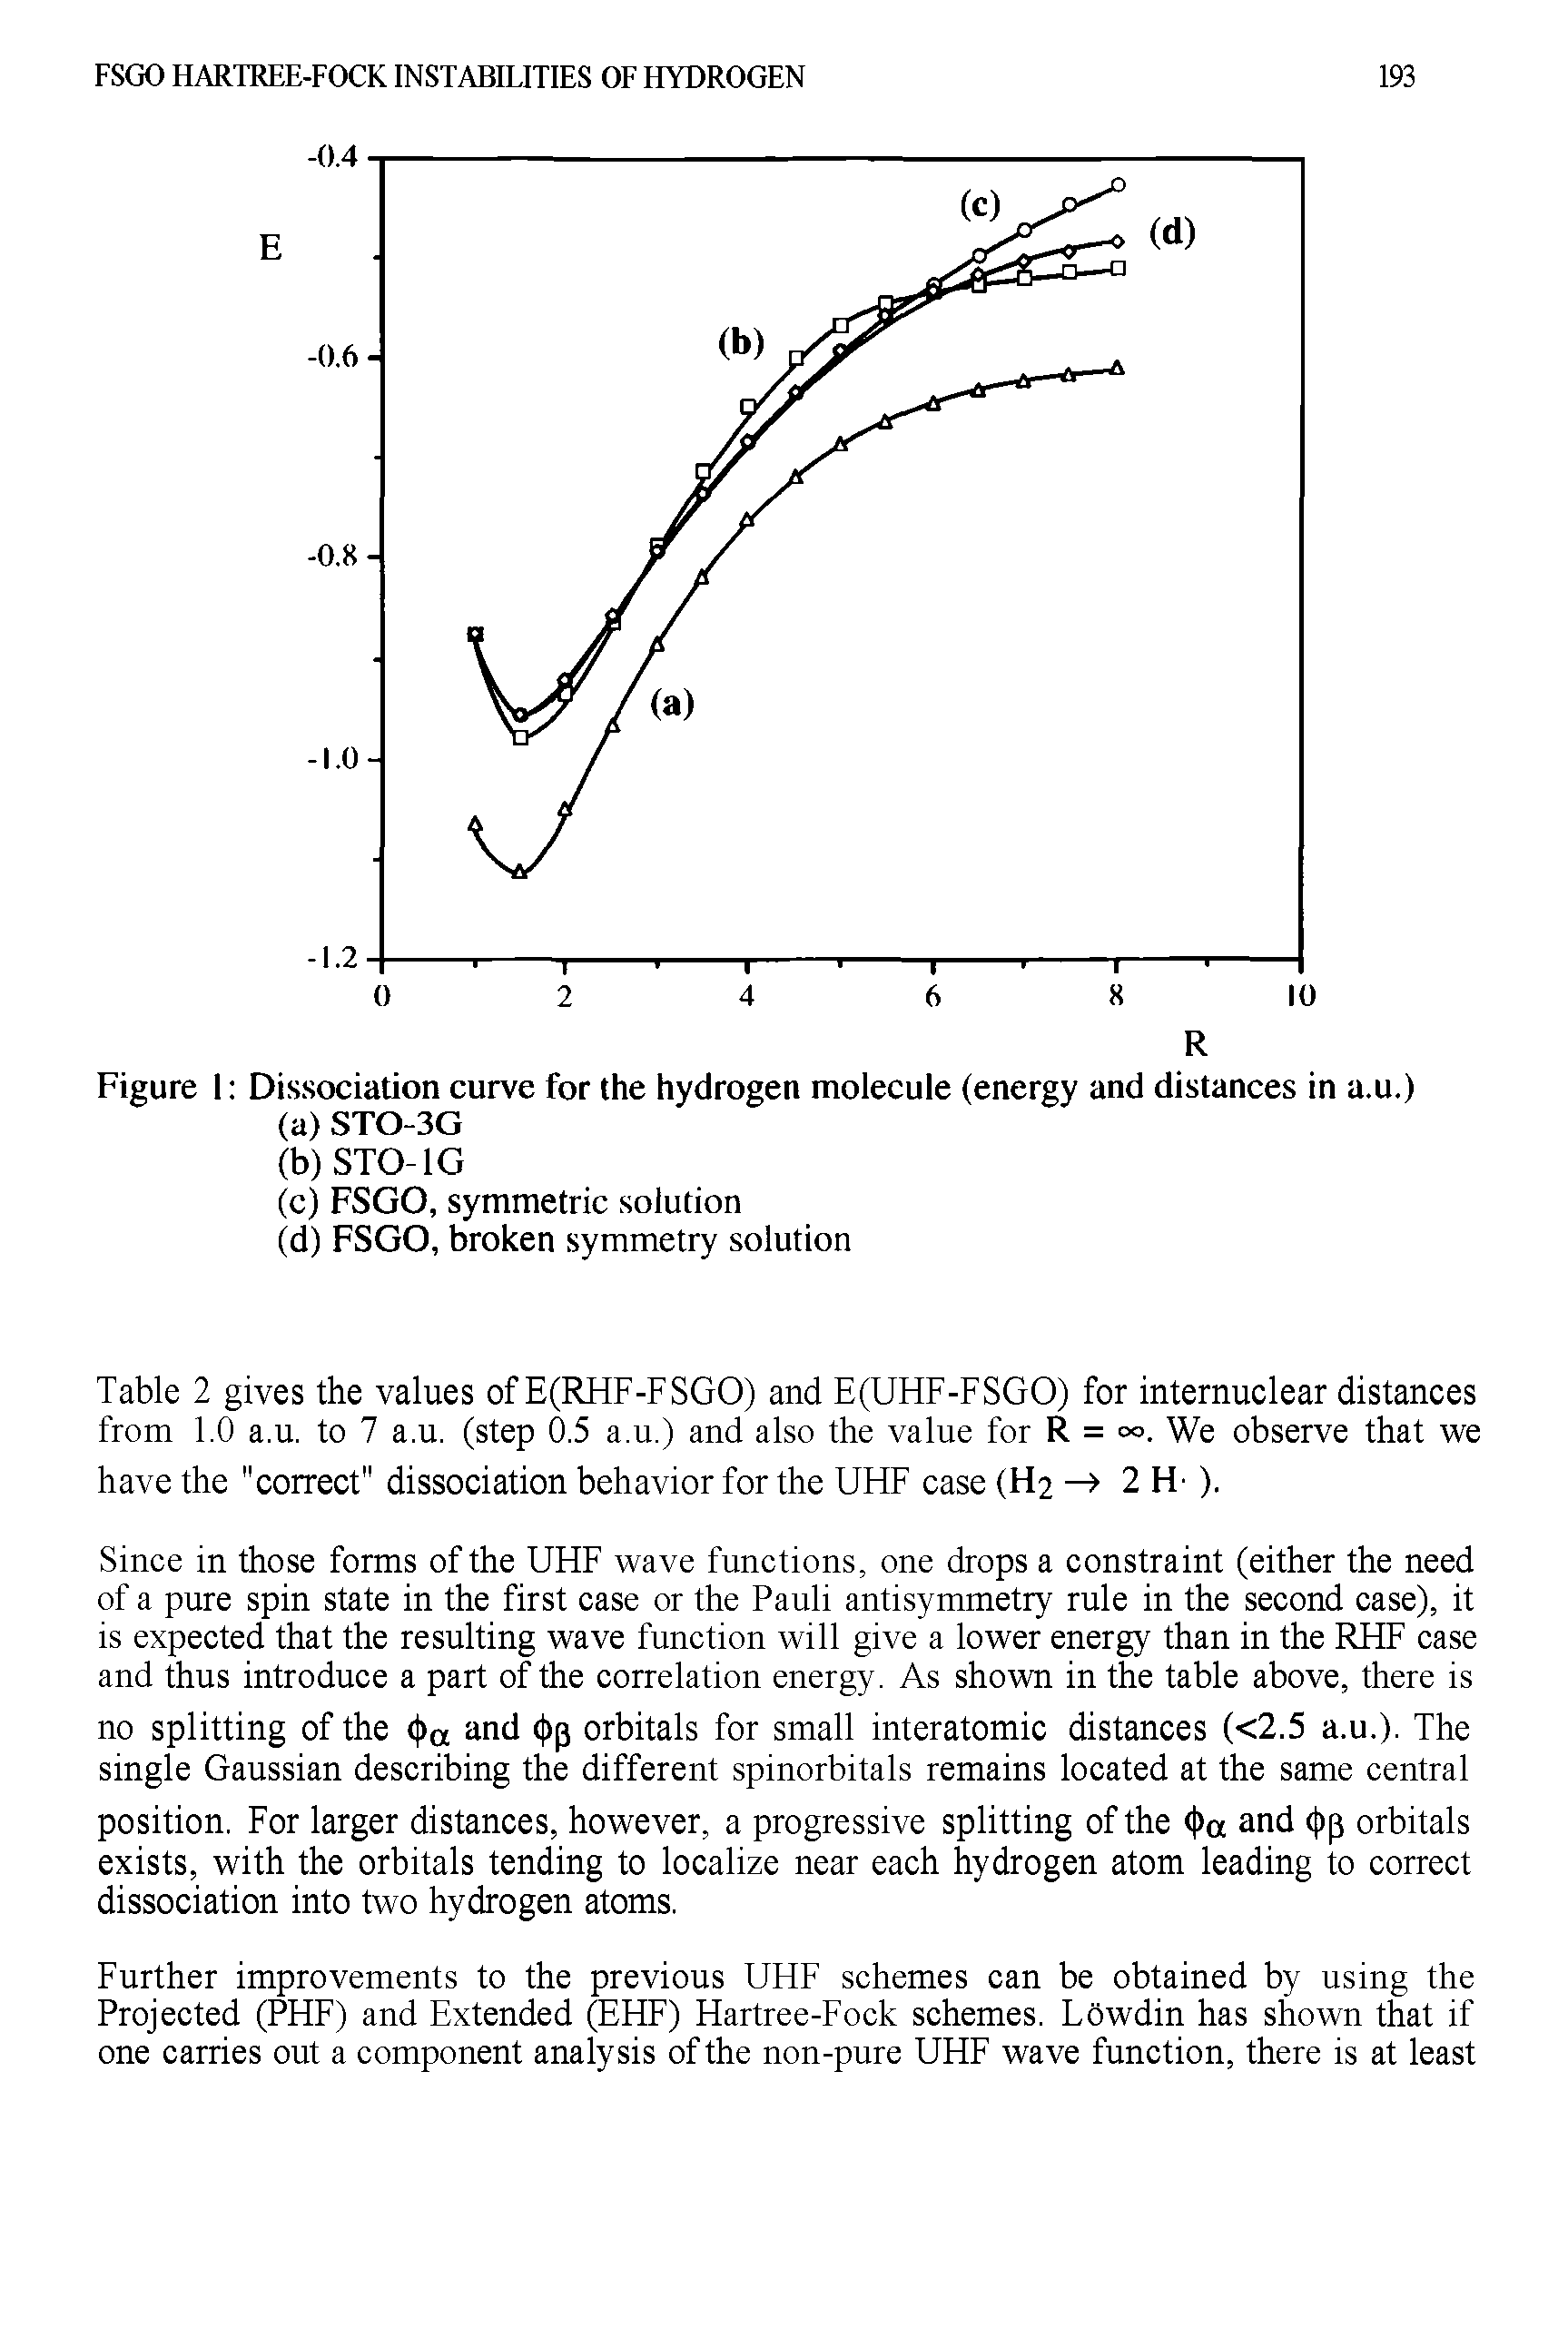 Figure 1 Dissociation curve for the hydrogen molecule (energy and distances in a.u.)...